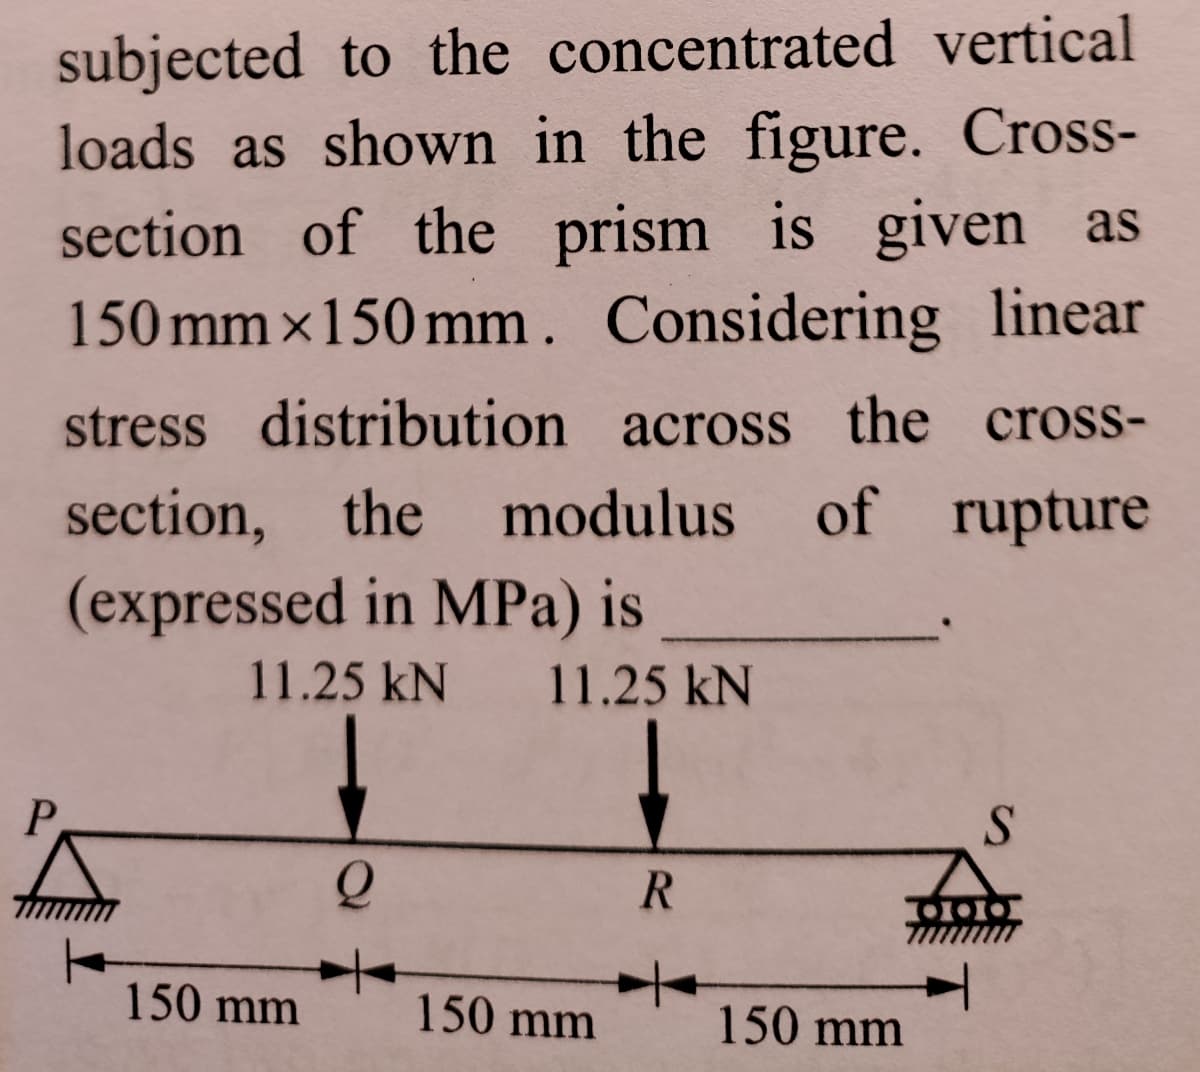 subjected to the concentrated vertical
loads as shown in the figure. Cross-
section of the prism is given as
150 mm x150 mm. Considering linear
stress distribution across the cross-
section, the modulus of rupture
(expressed in MPa) is
11.25 kN
11.25 kN
P
150 mm
150 mm
150 mm
